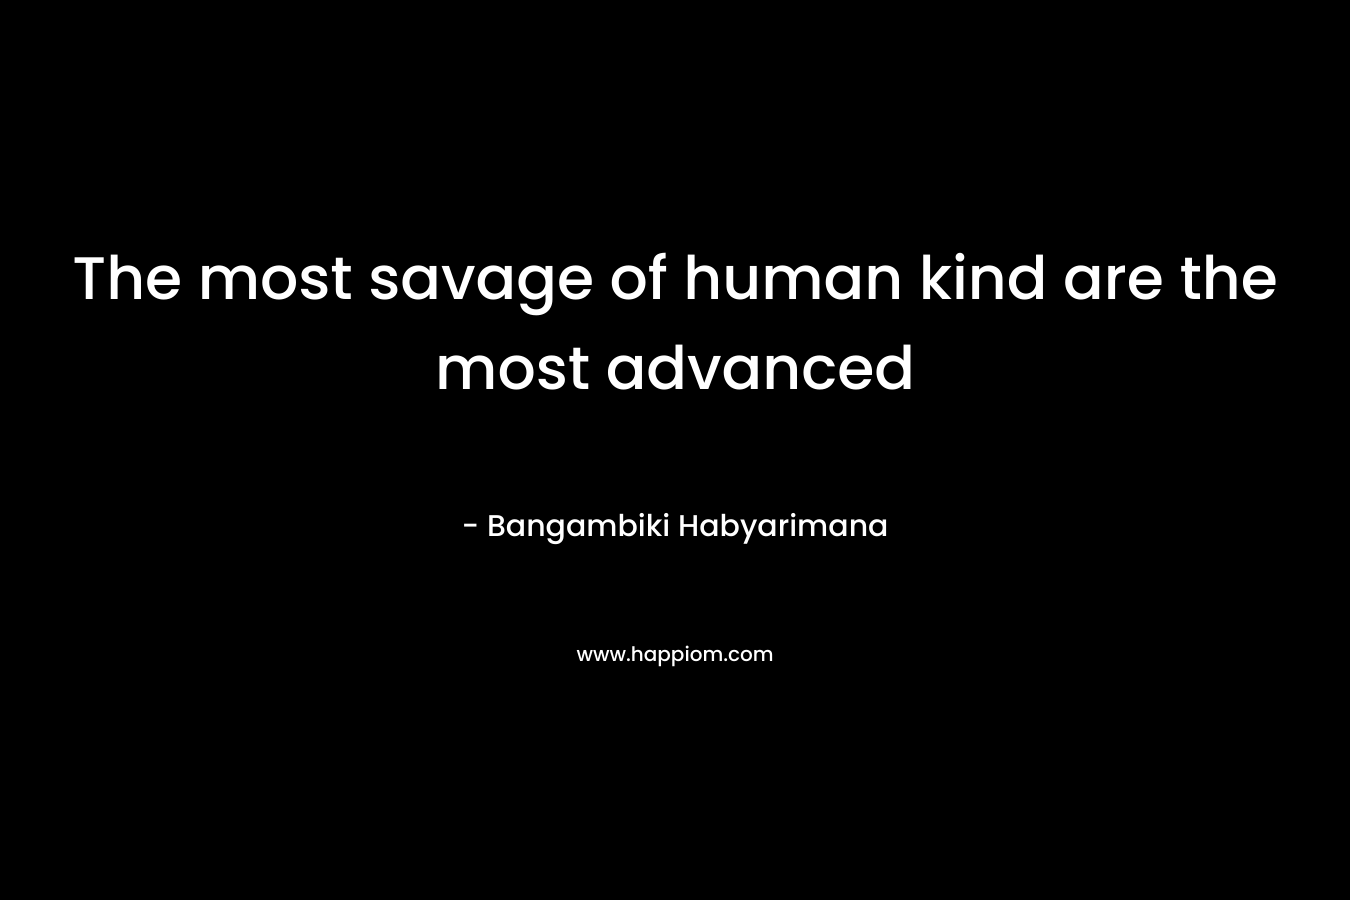 The most savage of human kind are the most advanced